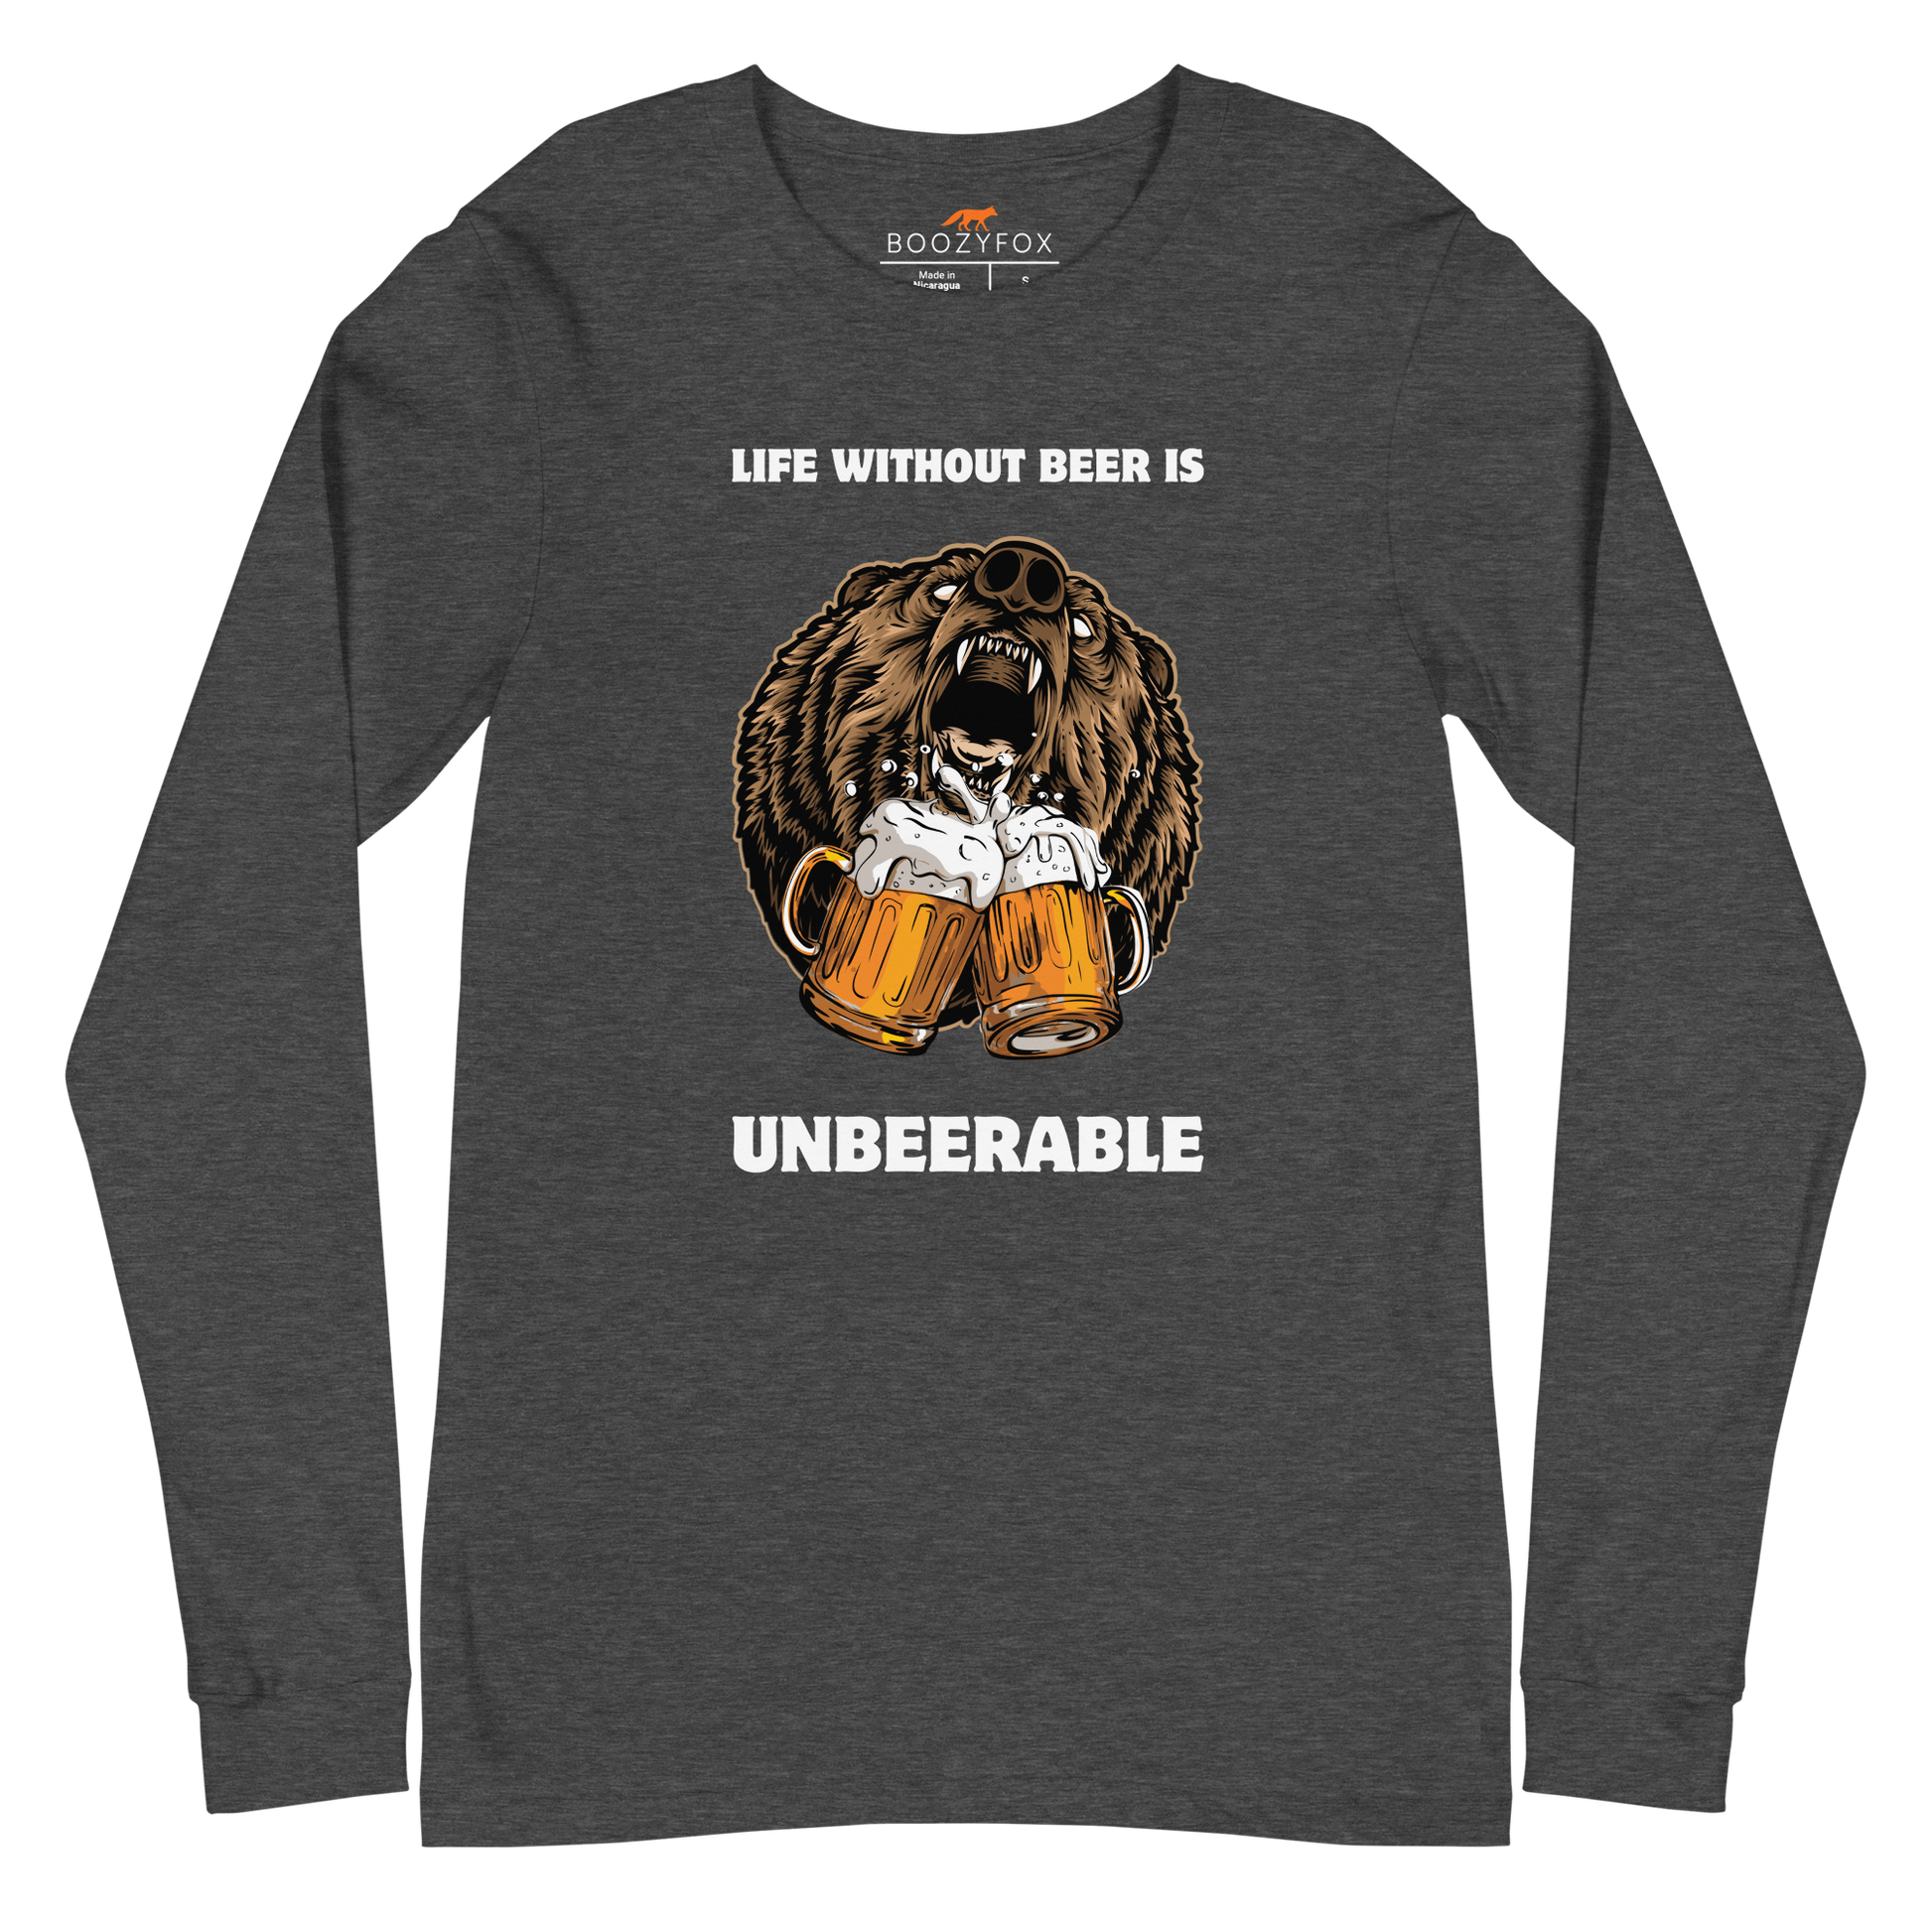 Dark Grey Heather Bear Long Sleeve Tee featuring a Life Without Beer Is Unbeerable graphic on the chest - Funny Bear Long Sleeve Graphic Tees - Boozy Fox